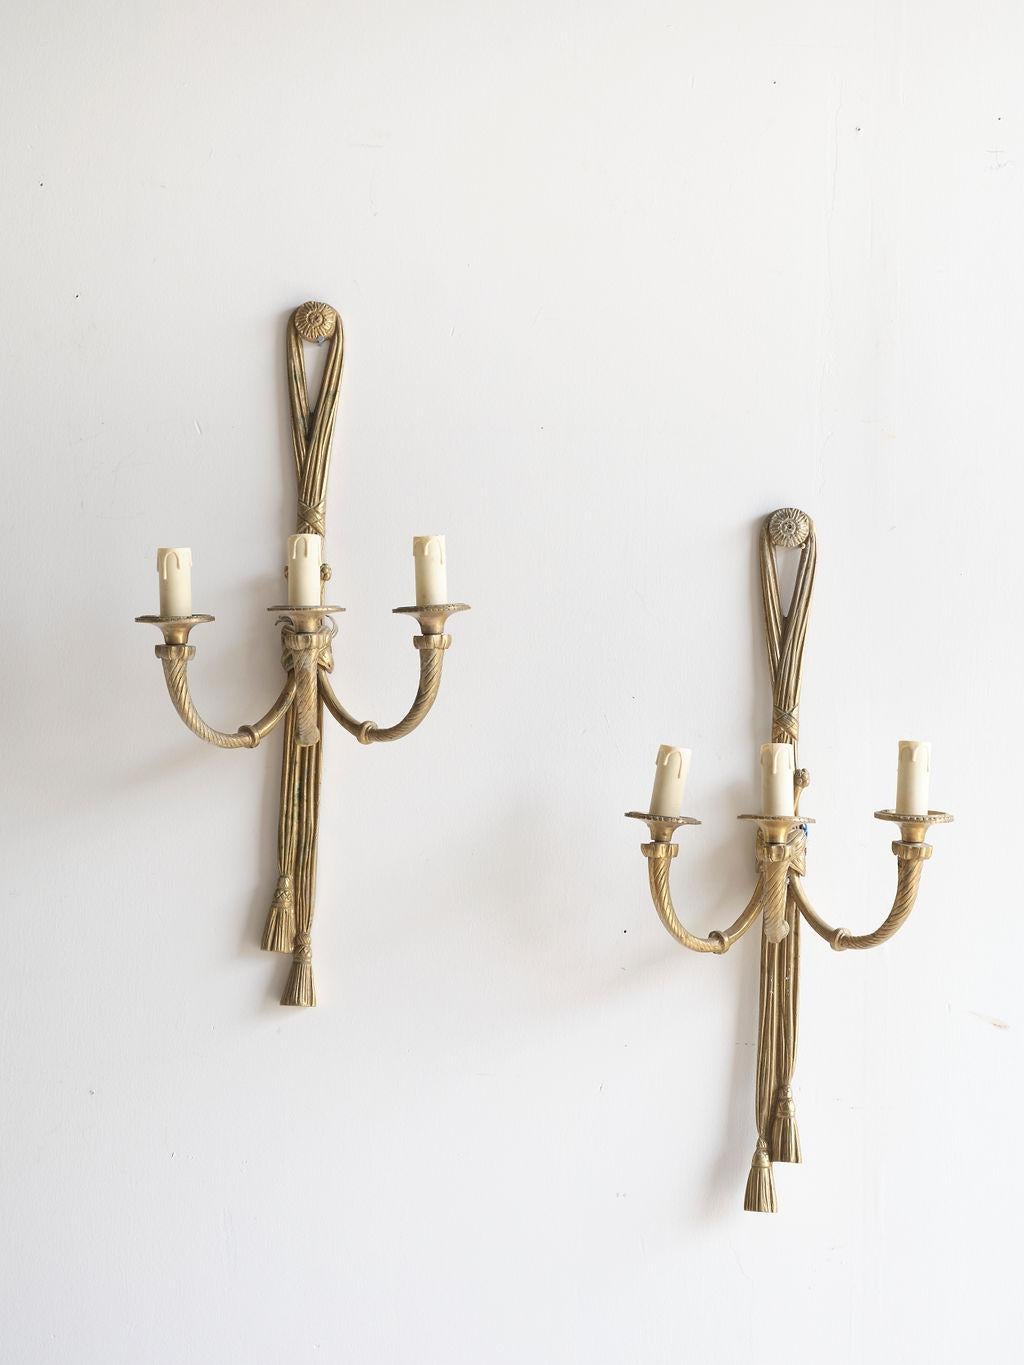 A lovely pair of French brass twisted wall sconces, in the style of Louis XVI, with three arms. Each arm has a candelabra holder with a plastic fake candle on it. The fake candle has fake 